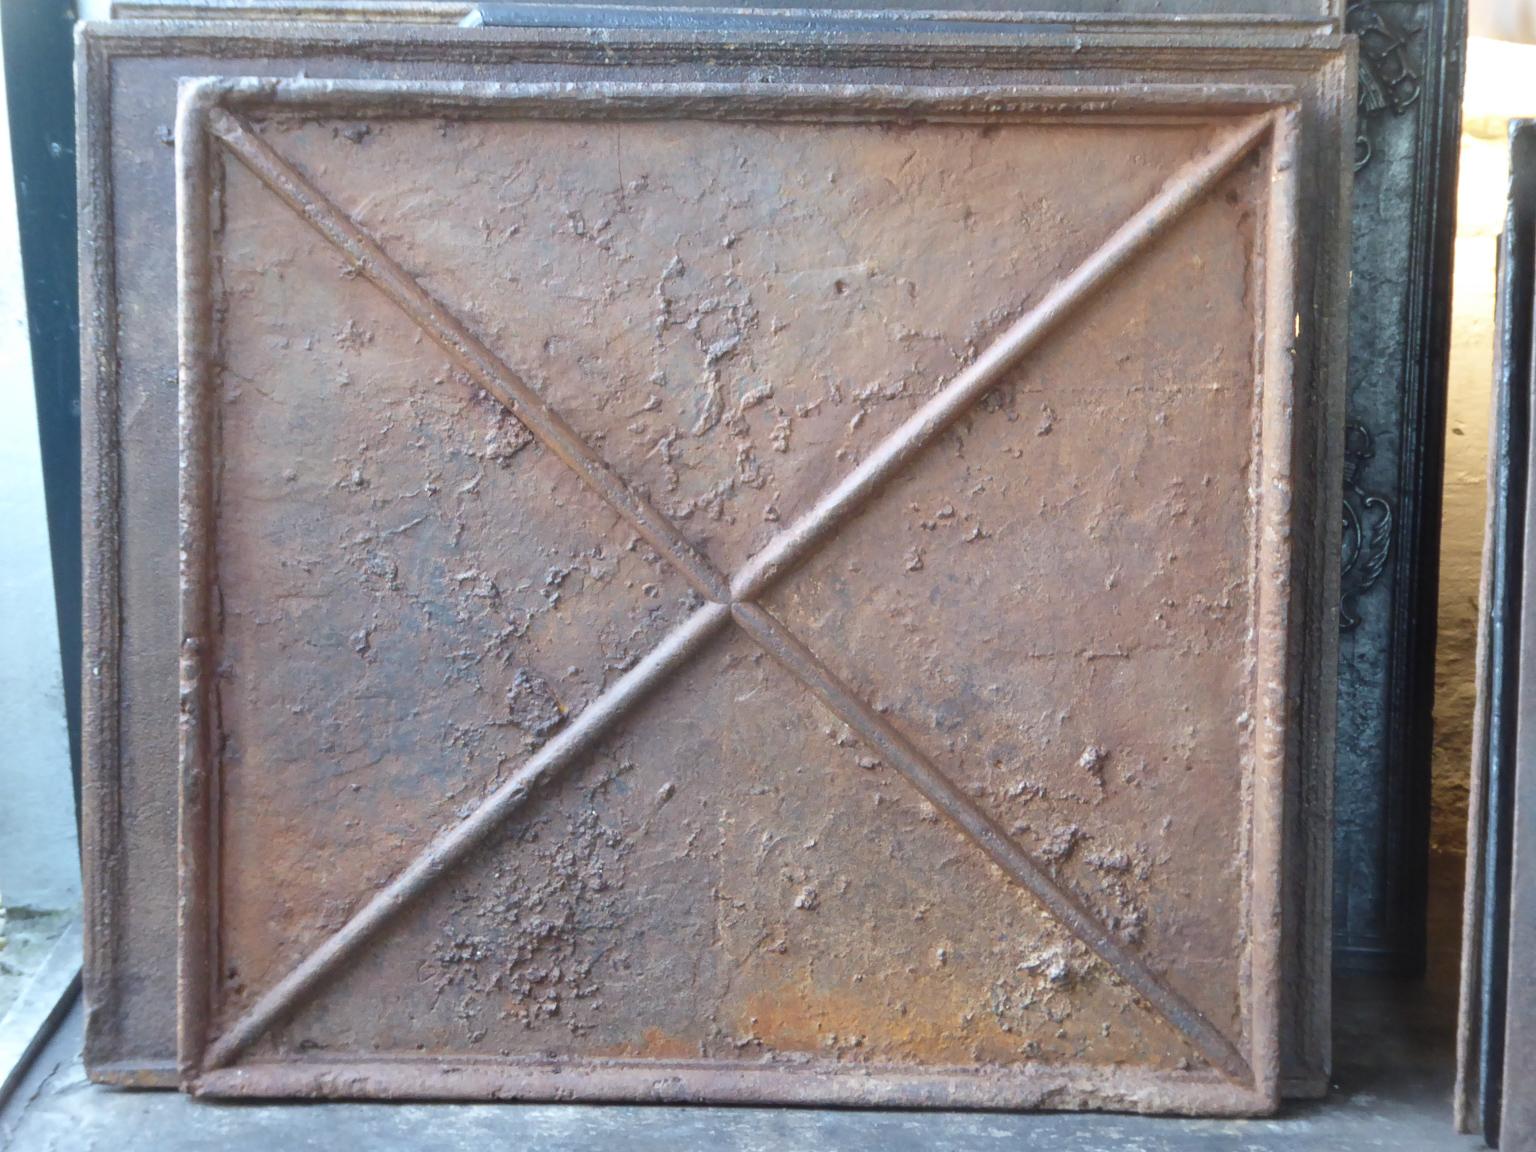 Beautiful 18th century French fireback with a Saint Andrew's cross. Saint Andrew is said to have been martyred on a cross in this shape. The cross is since then a sign for humility and sacrifice. The patina of the fireback is a natural brown, which